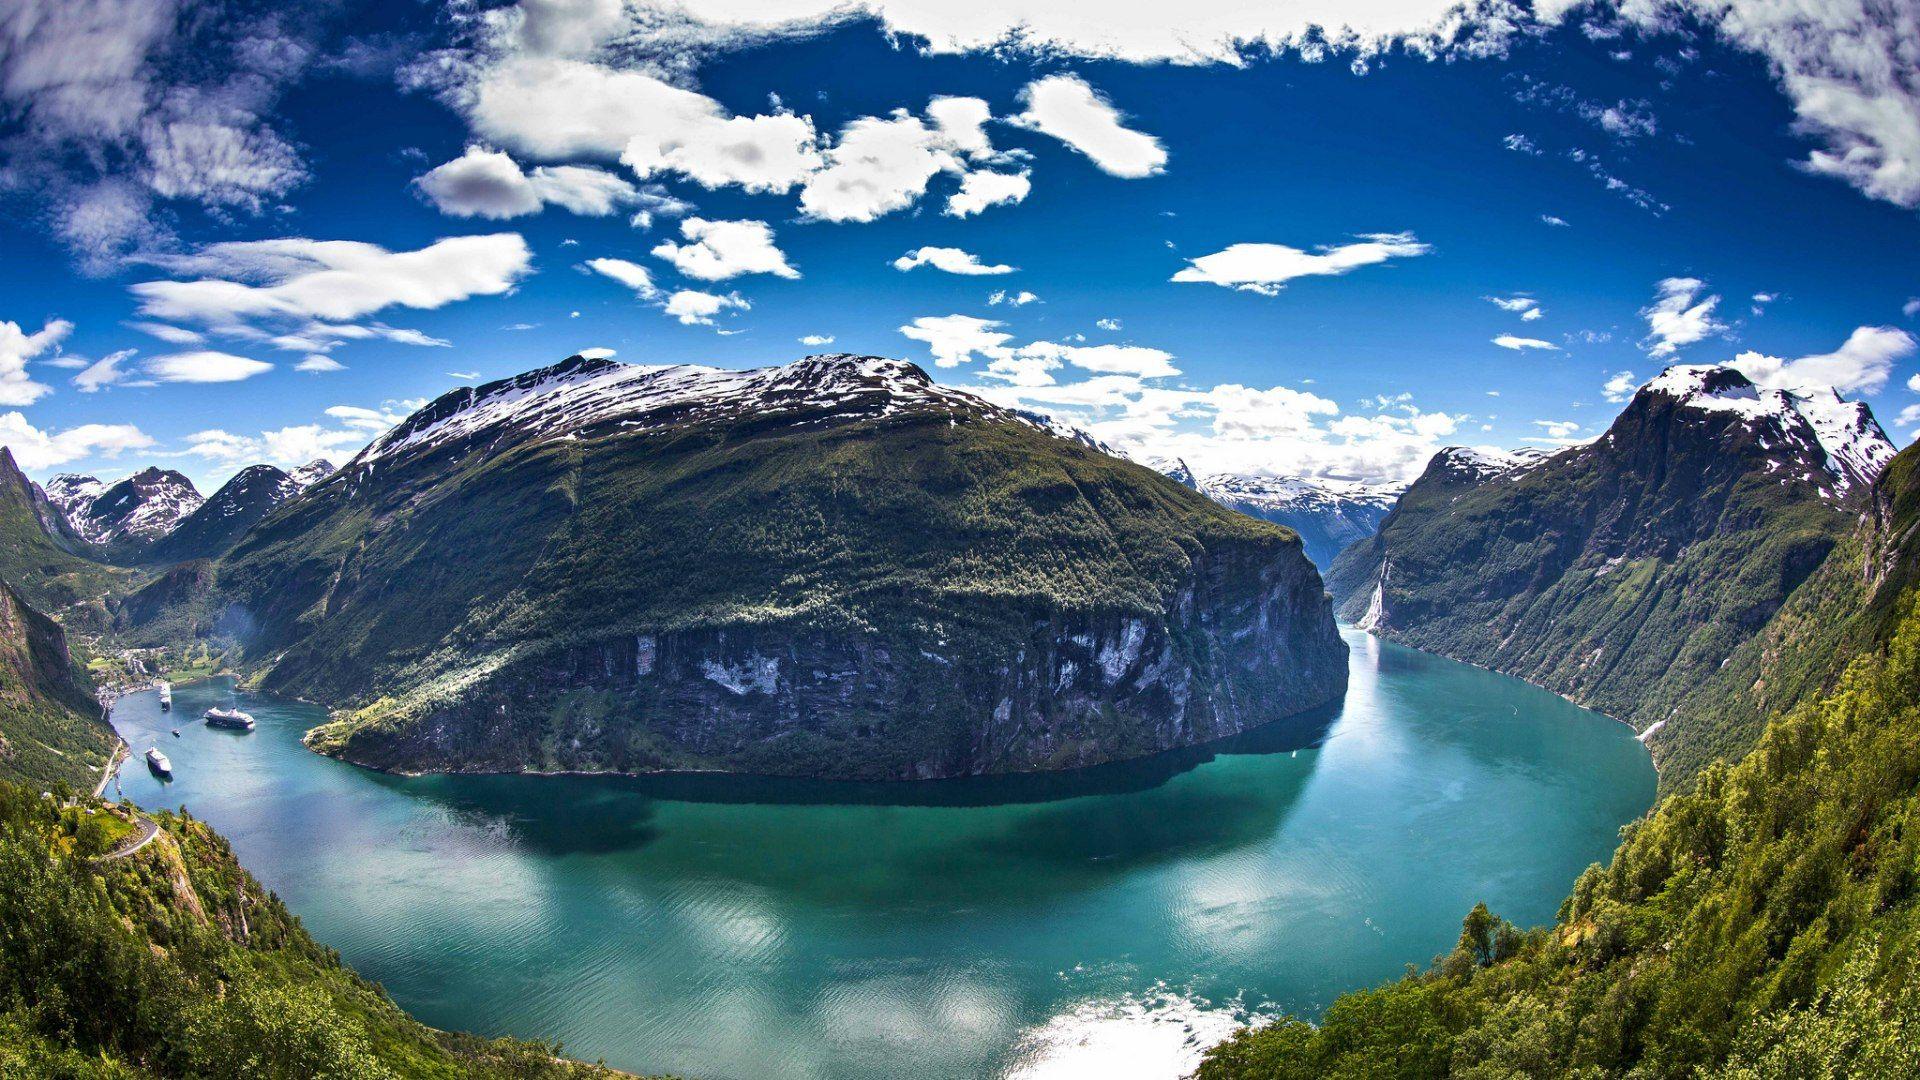 Fjord region Sunnmøre, Norway wallpaper and image